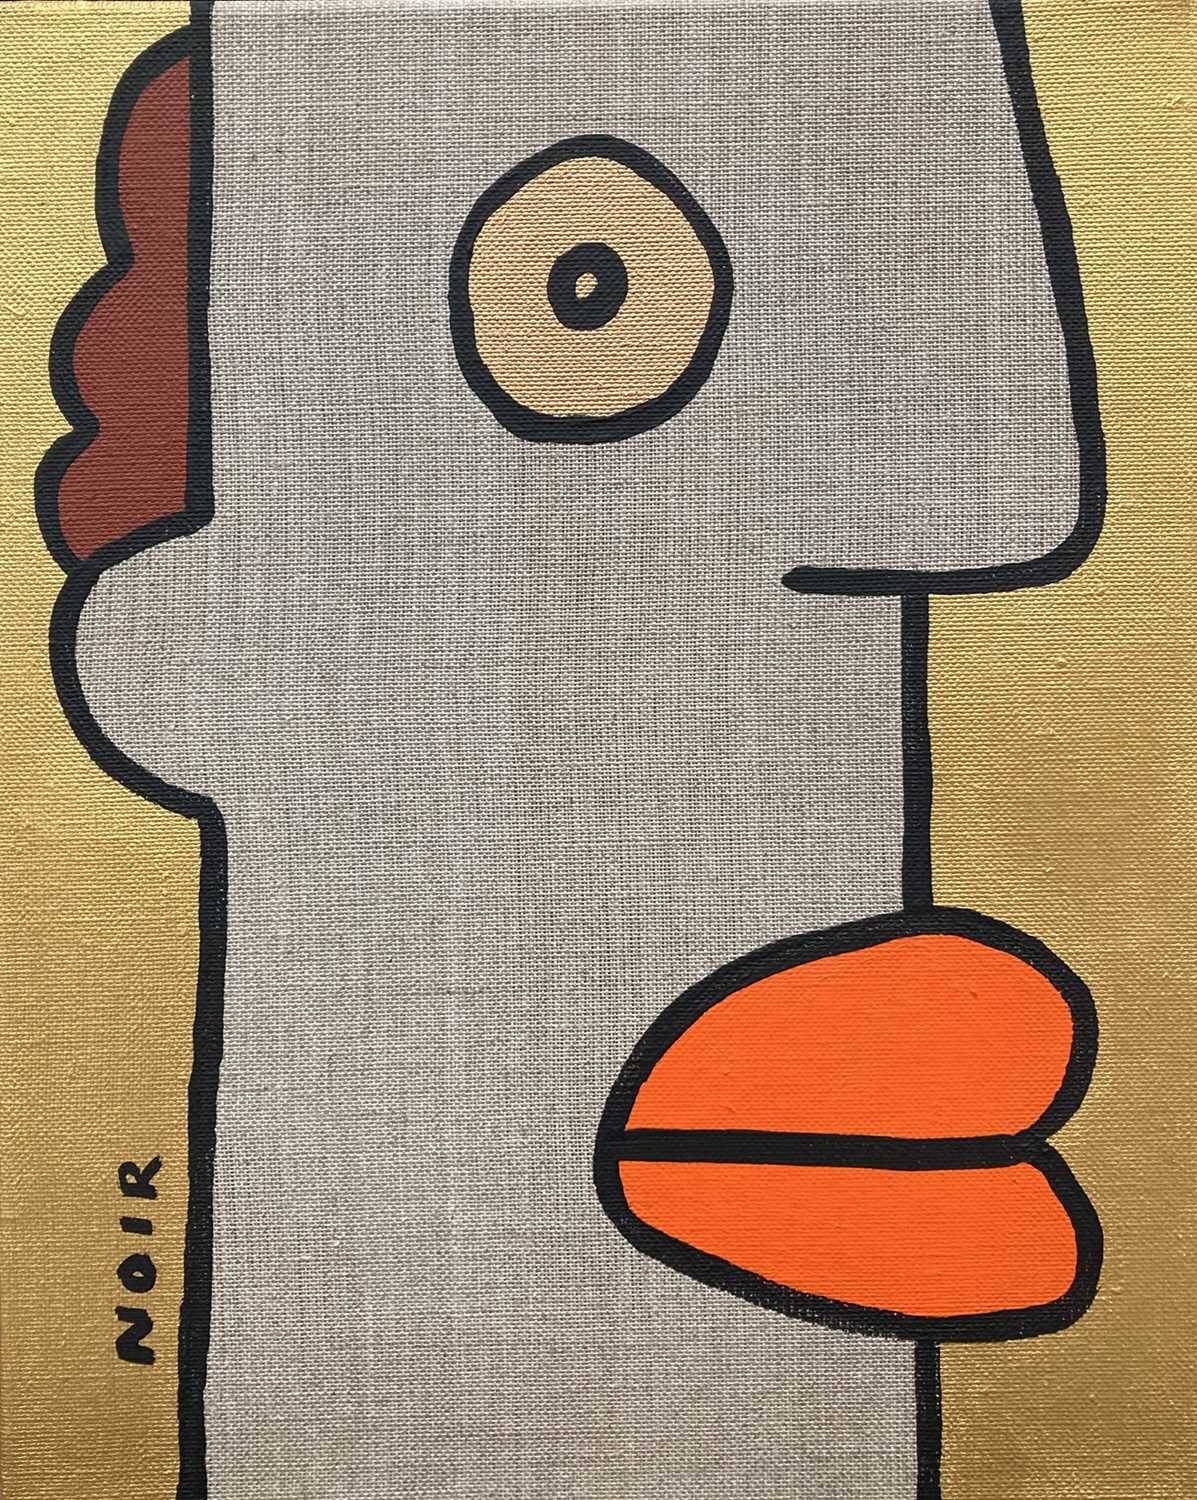 Lot 202 - Thierry Noir (French 1958-), 'What Do You Do When You Do Not', 2020